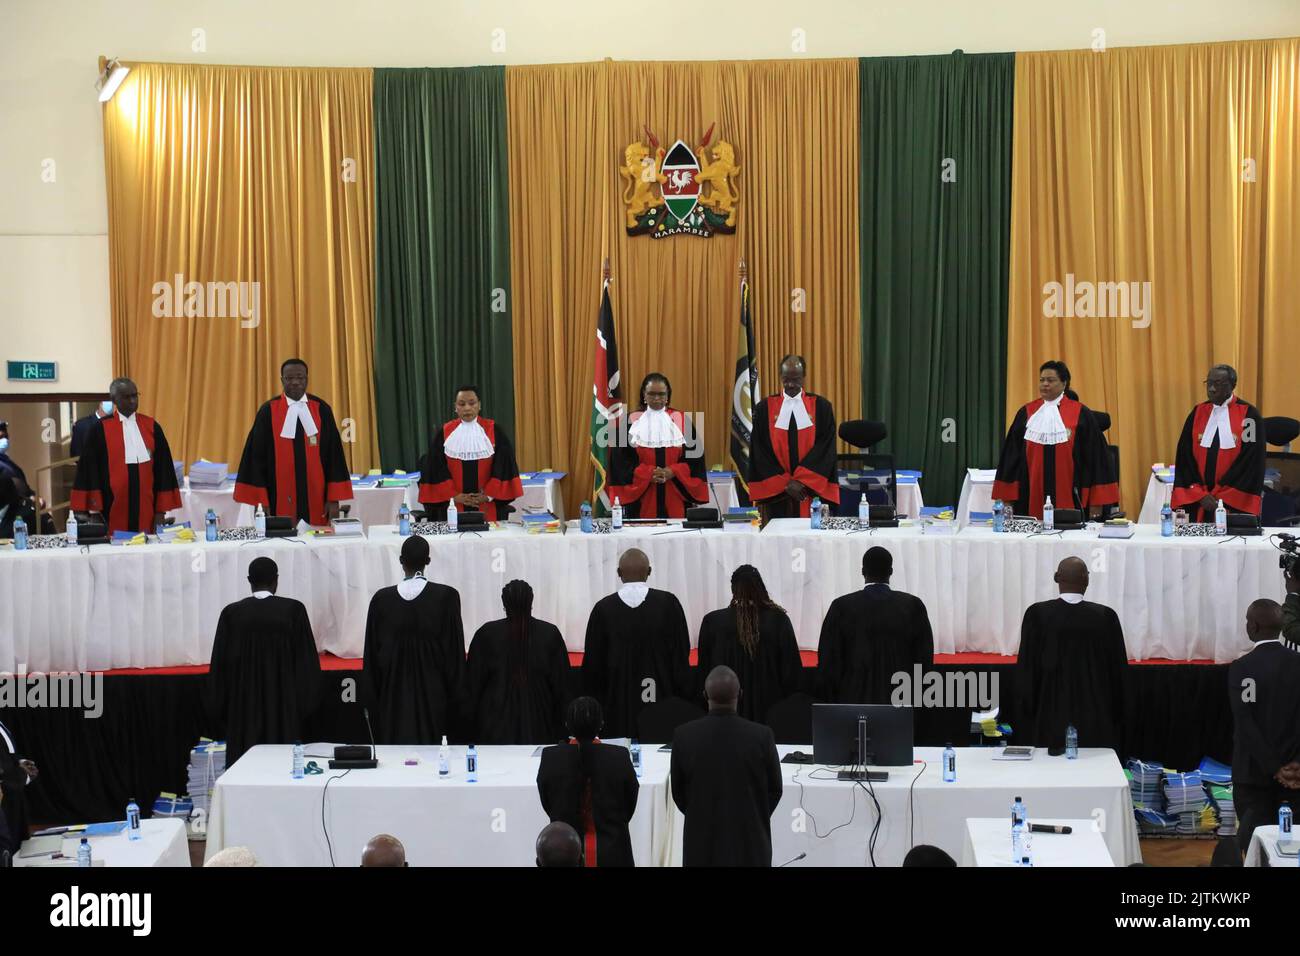 Chief justice of the supreme court Martha Koome (C) presides over a bench of seven judges which consists of (L-R) Supreme court judges, Isaac Lenaola, Smokin Wanjala, Philomena Mwilu, Mohamed Ibrahim, Njoki Ndungu, and William Ouko during day one of the presidential election petition at the Supreme Court. Azimio la Umoja One Kenya coalition presidential candidate Raila Odinga on August 22, 2022 filed a petition at the Supreme Court Sub-Registry offices seeking to challenge the victory of president elect William Ruto which he termed as 'null and void'. Stock Photo